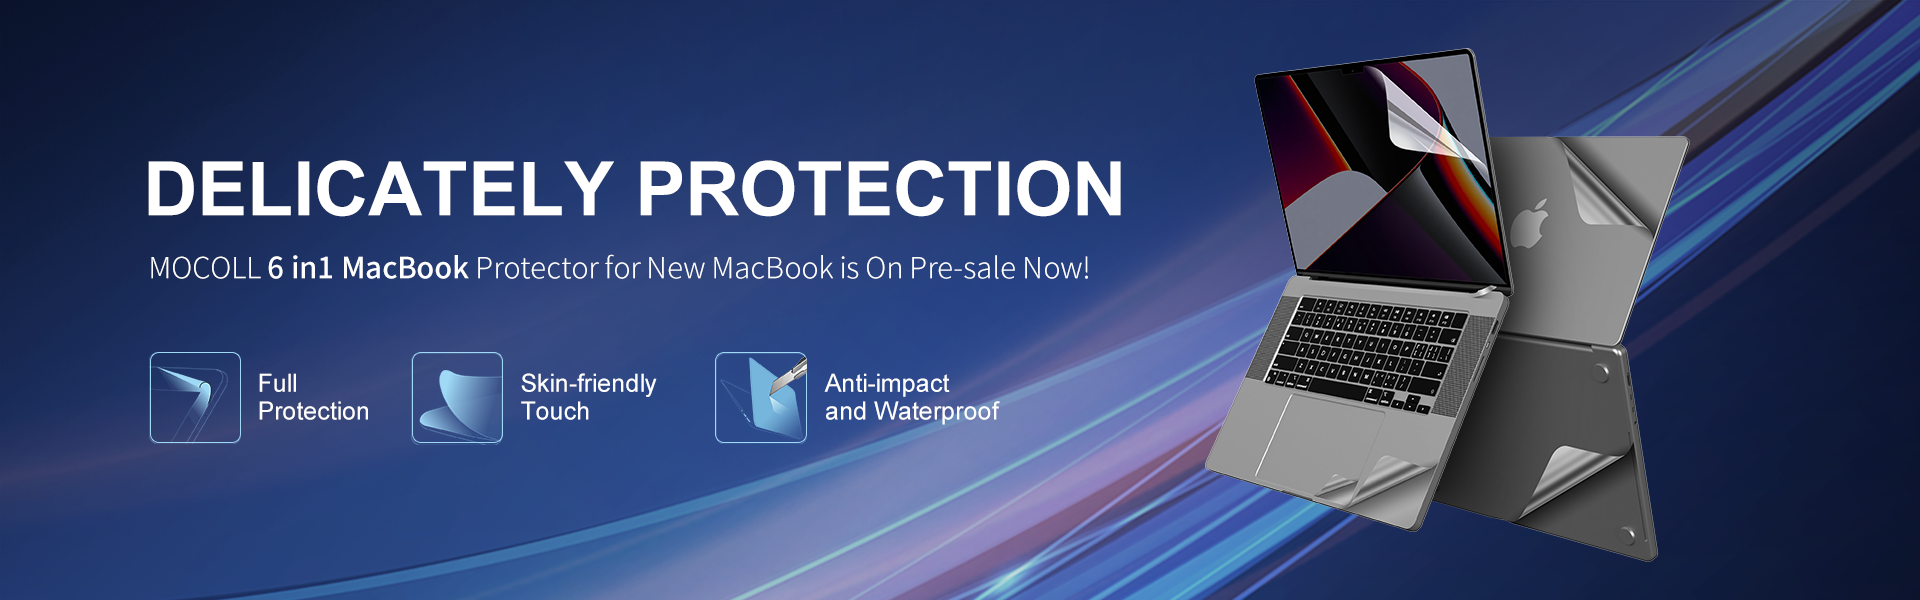 The New 6 in 1 Macbook protector is on-sale now!